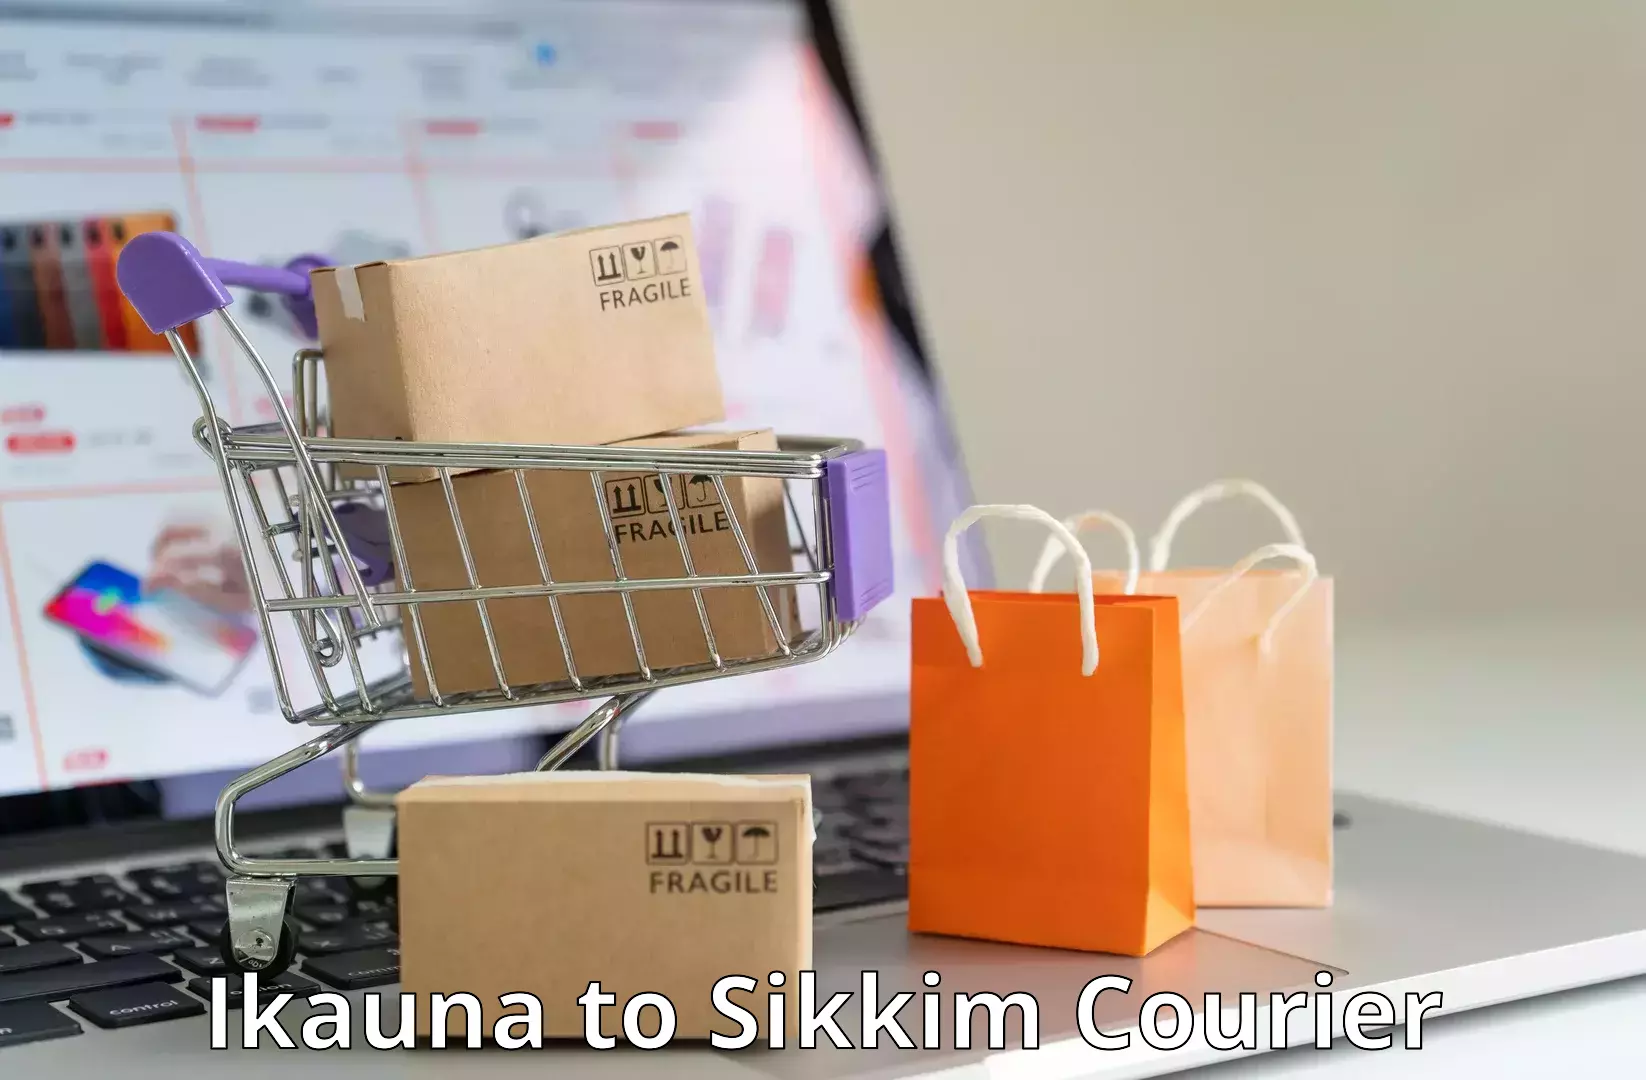 State-of-the-art courier technology Ikauna to East Sikkim